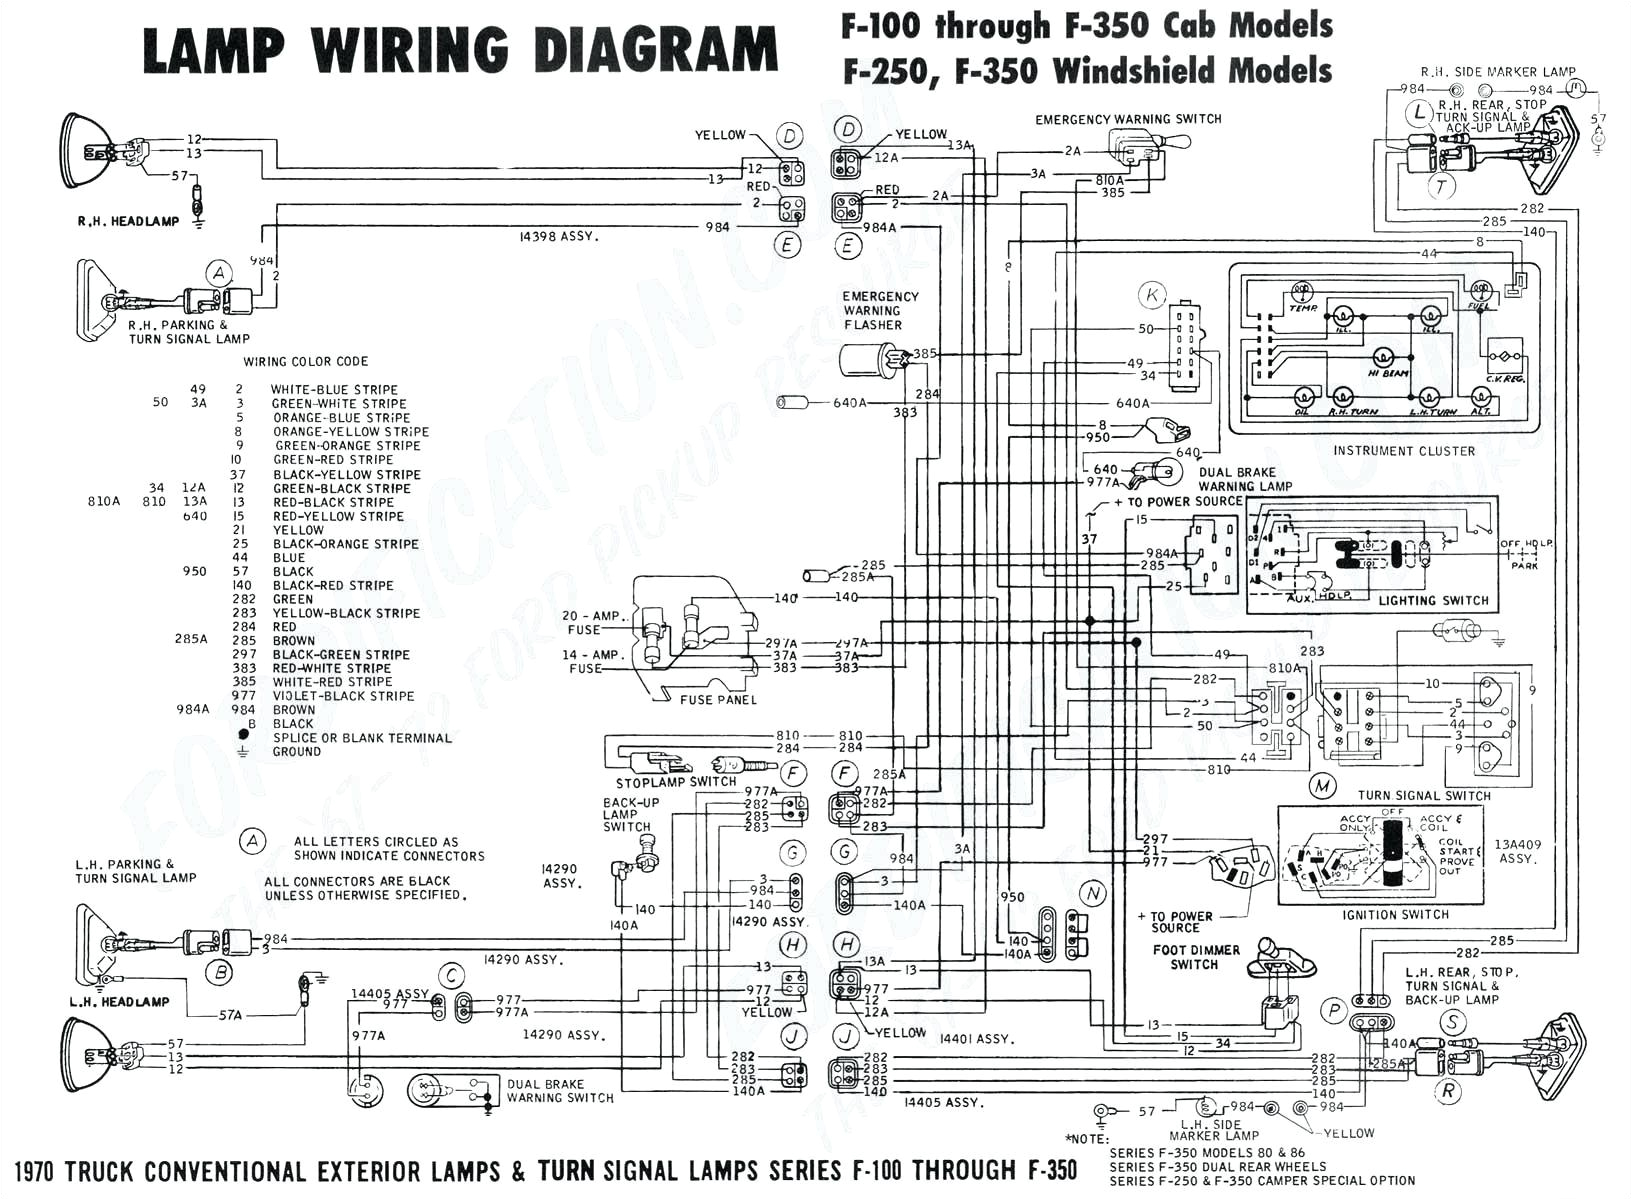 2003 ford f150 engine diagram top 2003 ford escape engine diagram picture all ford auto cars of 2003 ford f150 engine diagram jpg